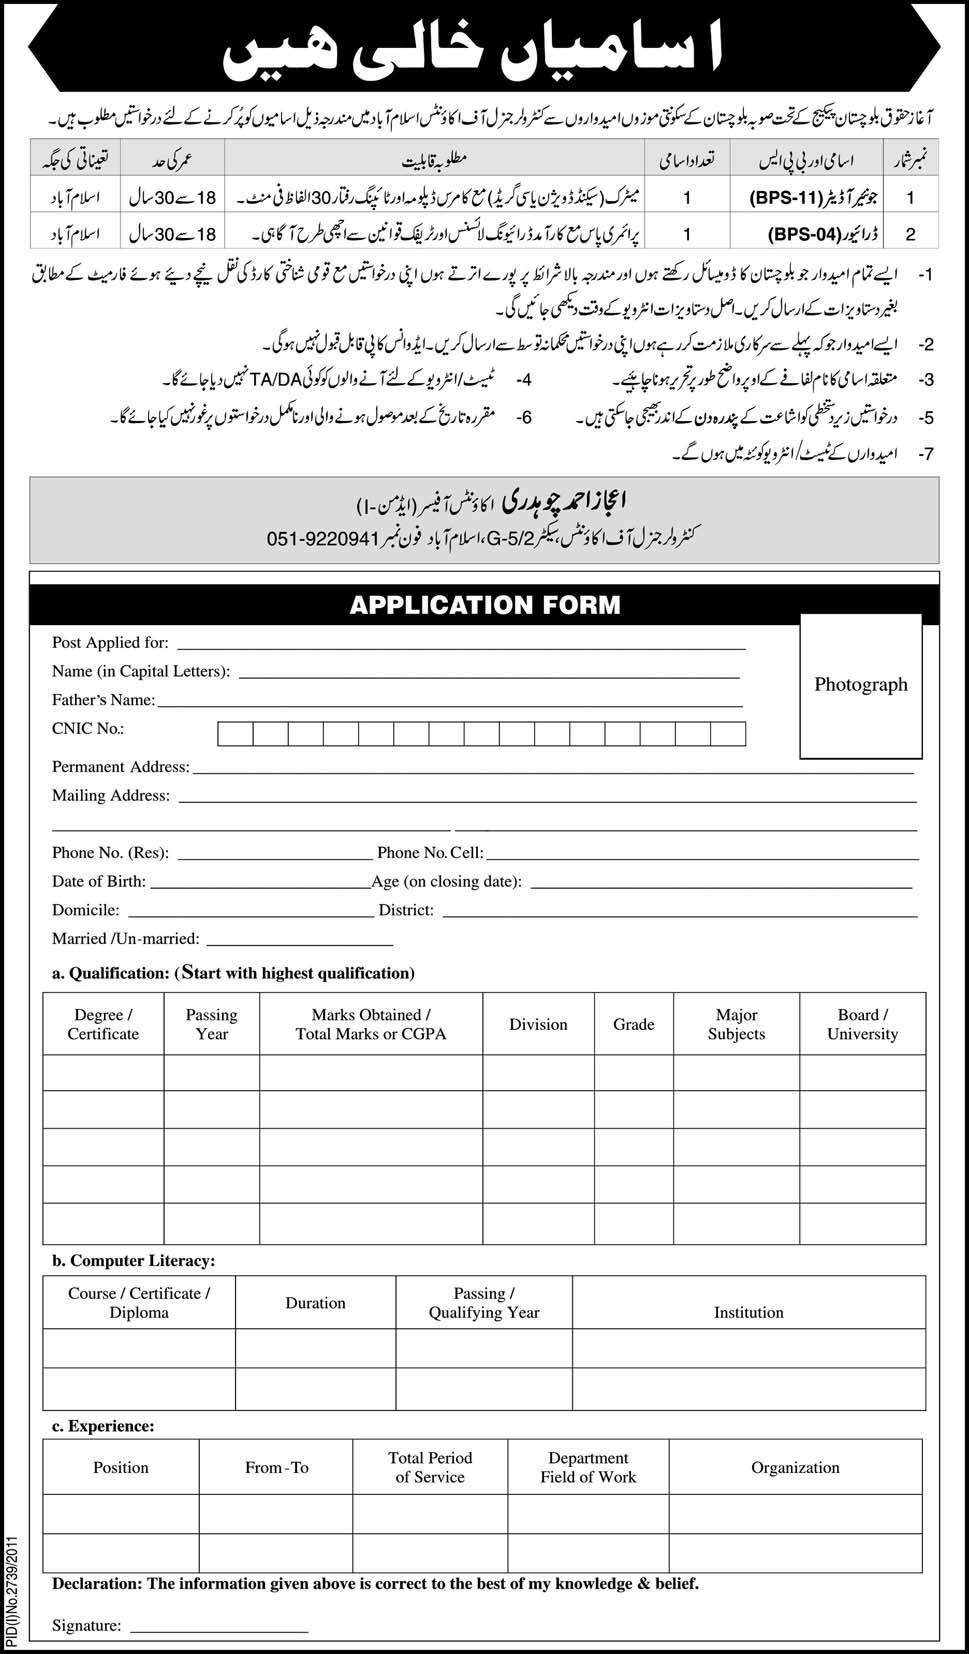 1101409683 1 Jobs in Islamabad under Aghaz Huqooq e Balochistan Package